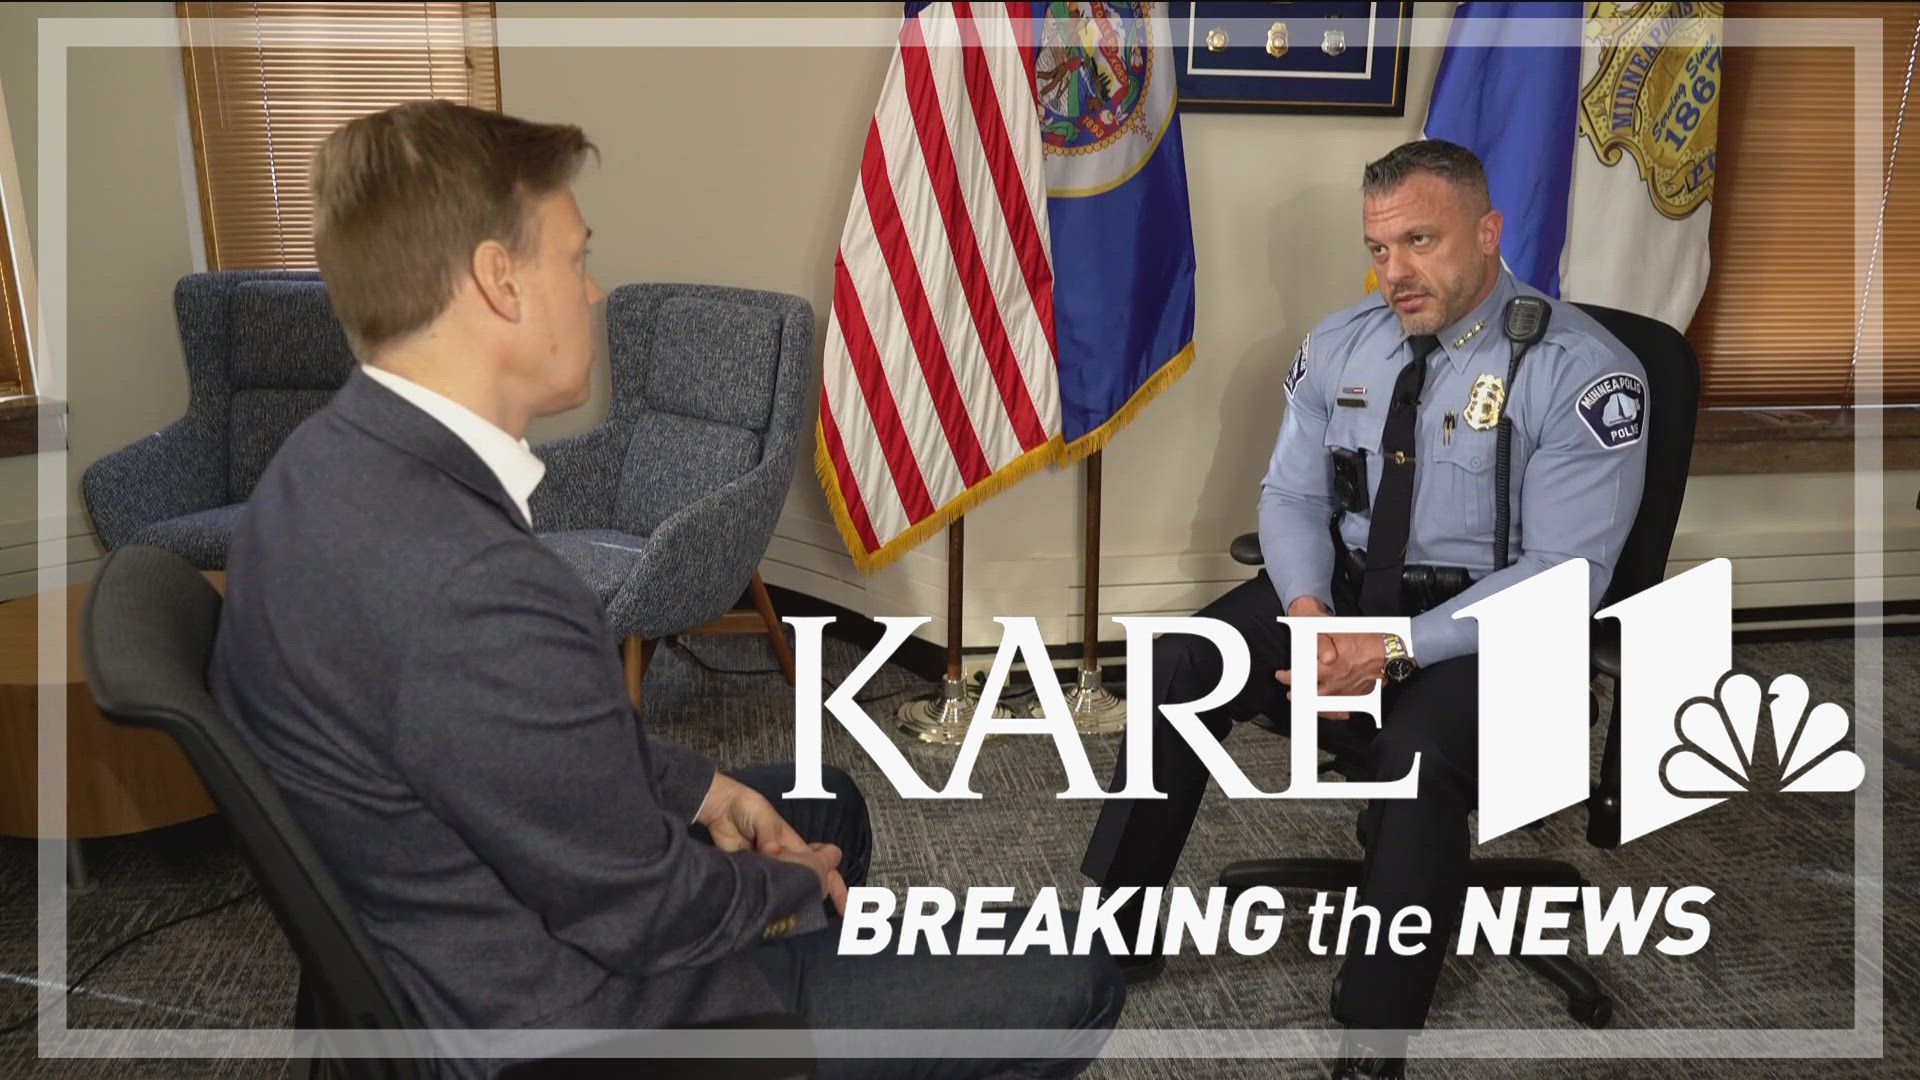 O'Hara discusses crime, recent car thefts and staffing issues facing the department.